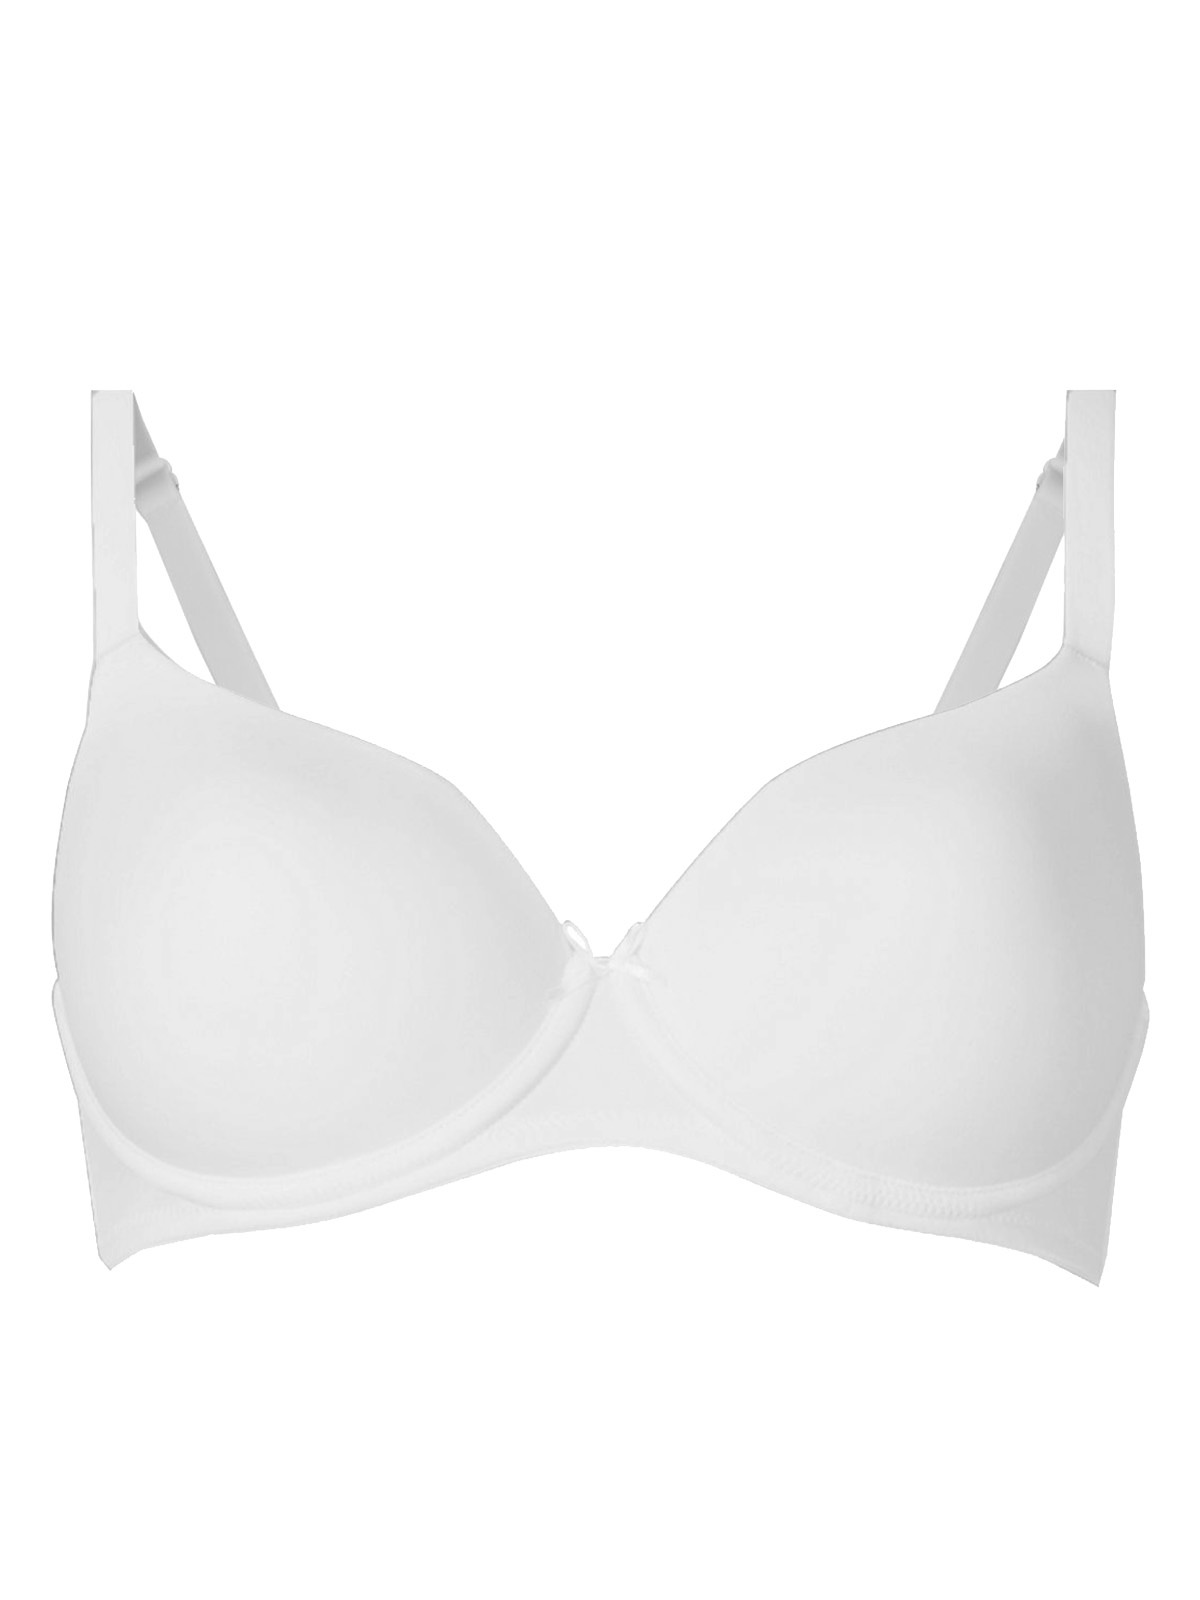 Marks and Spencer - - M&5 ASSORTED Plain & Lace Bras - Size 32 to 44 (A ...